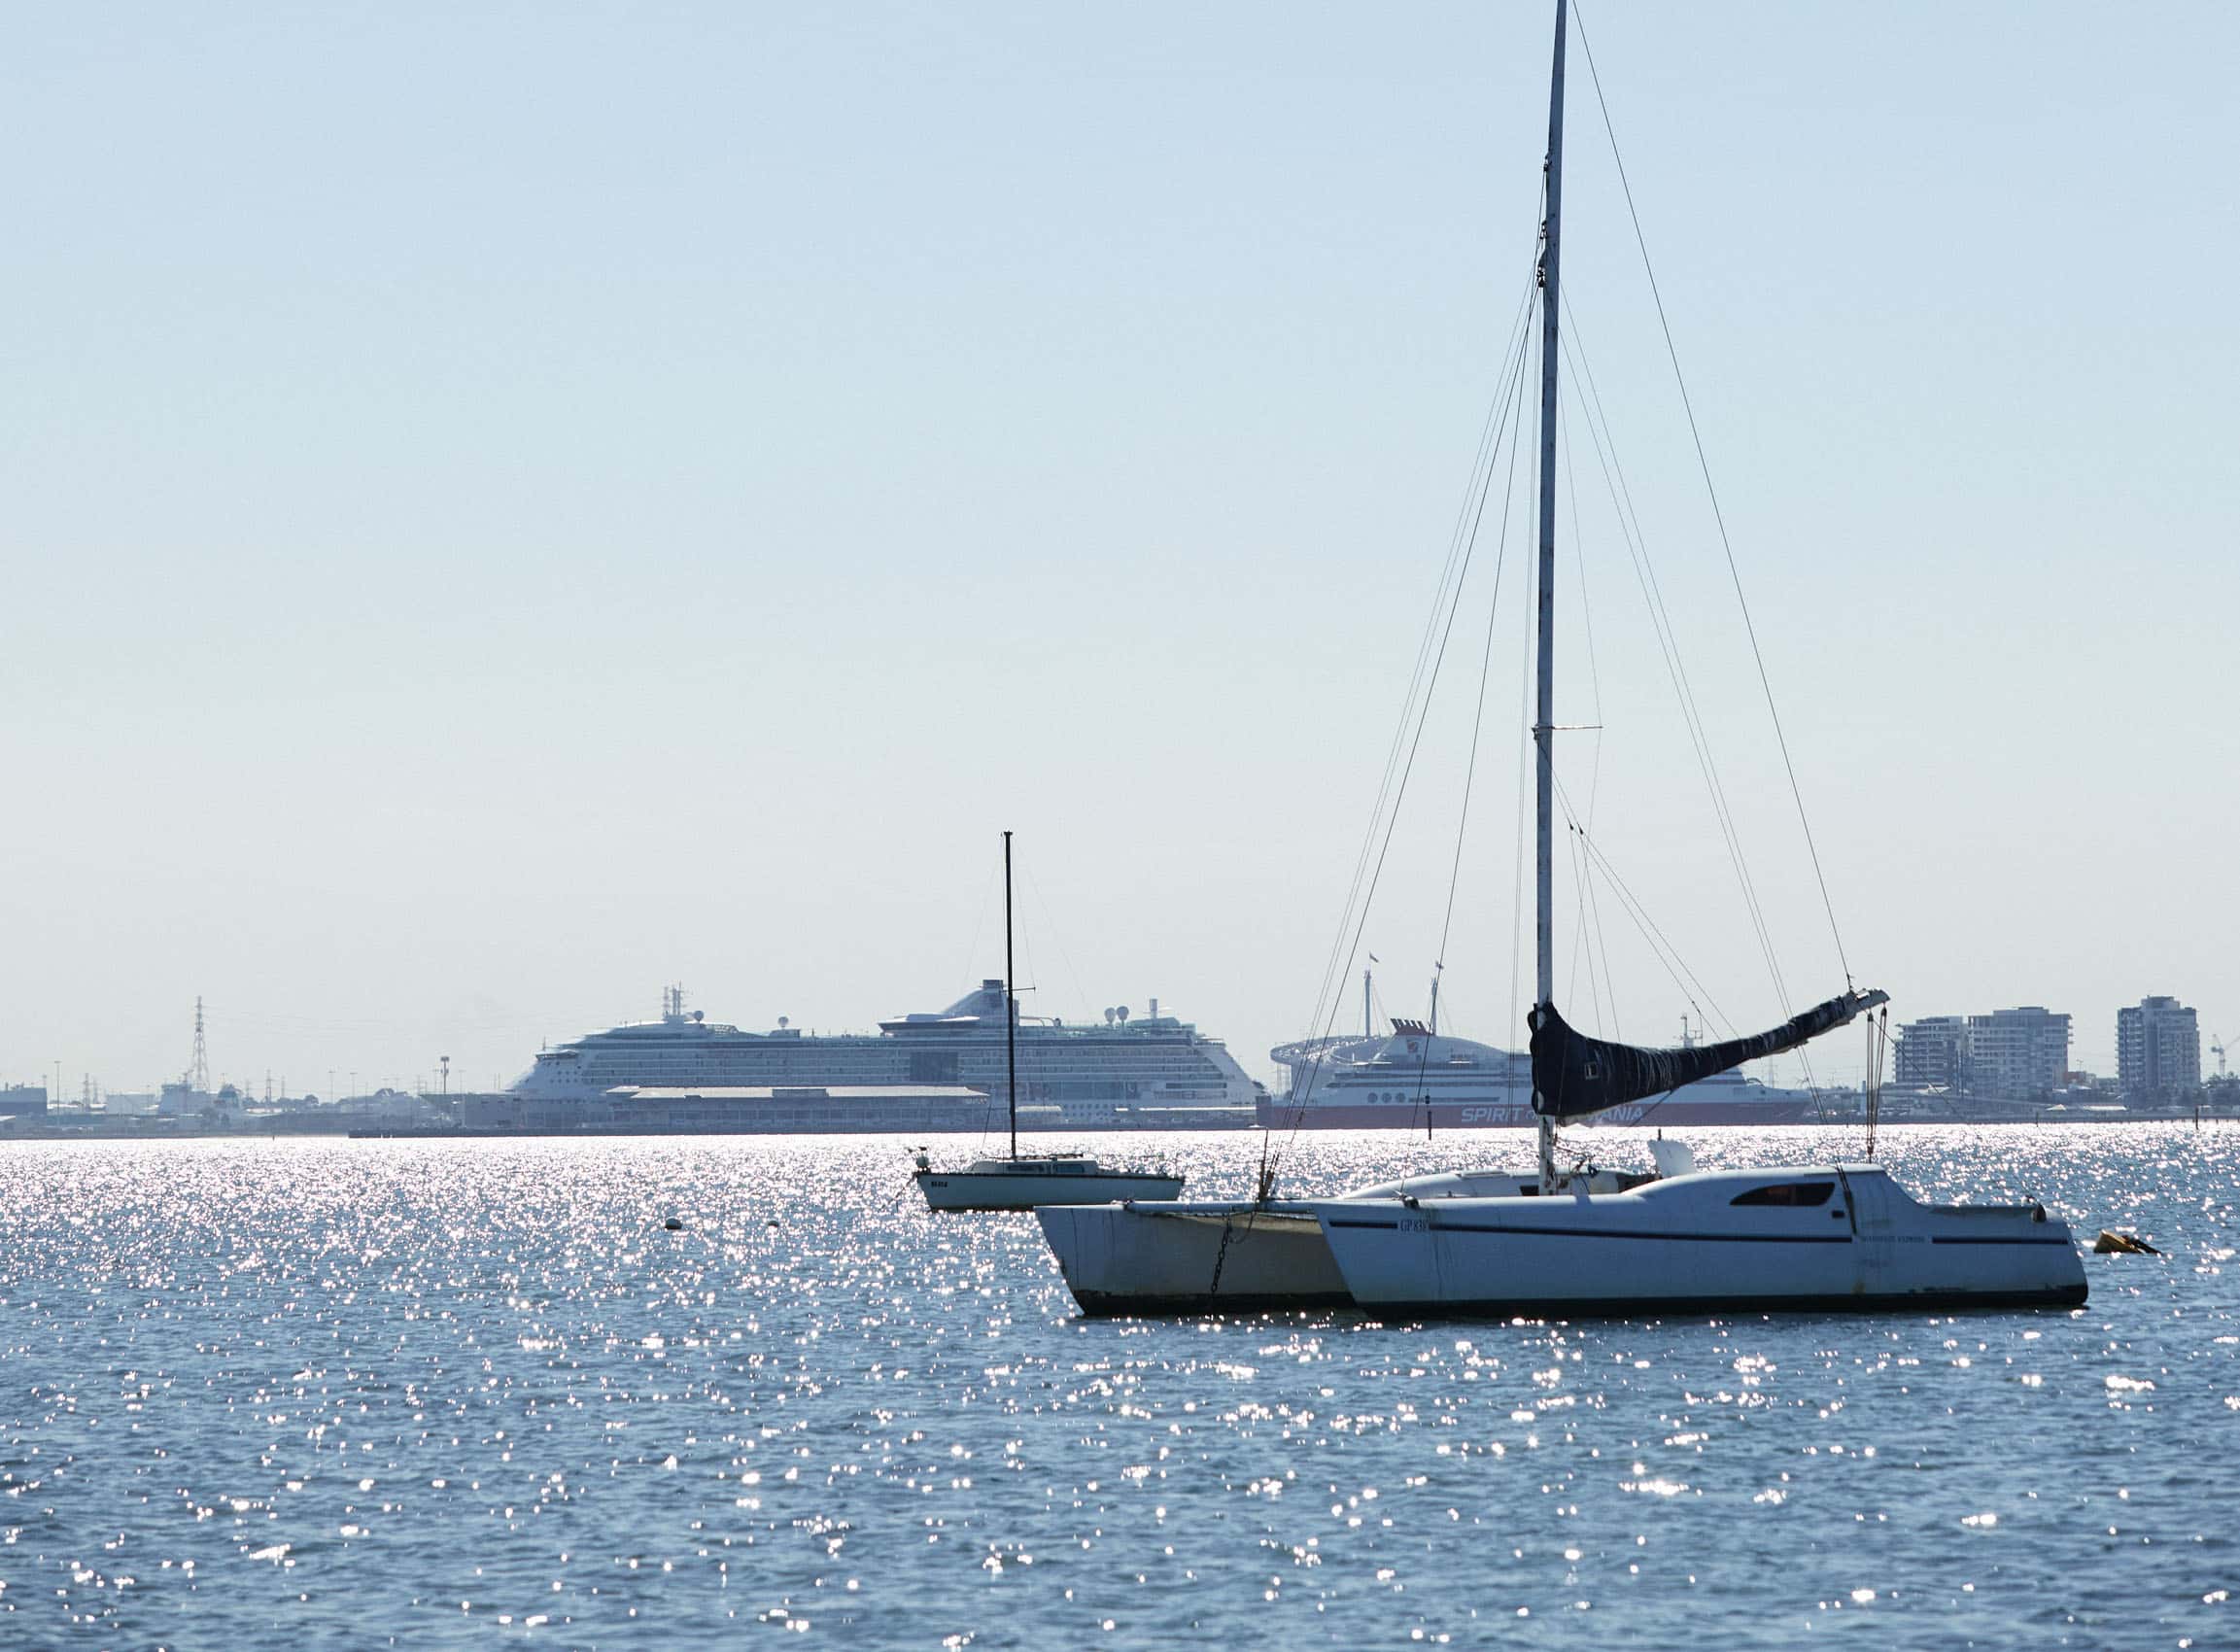 All the delights of Port Phillip Bay and its local beaches are just a few minutes away.